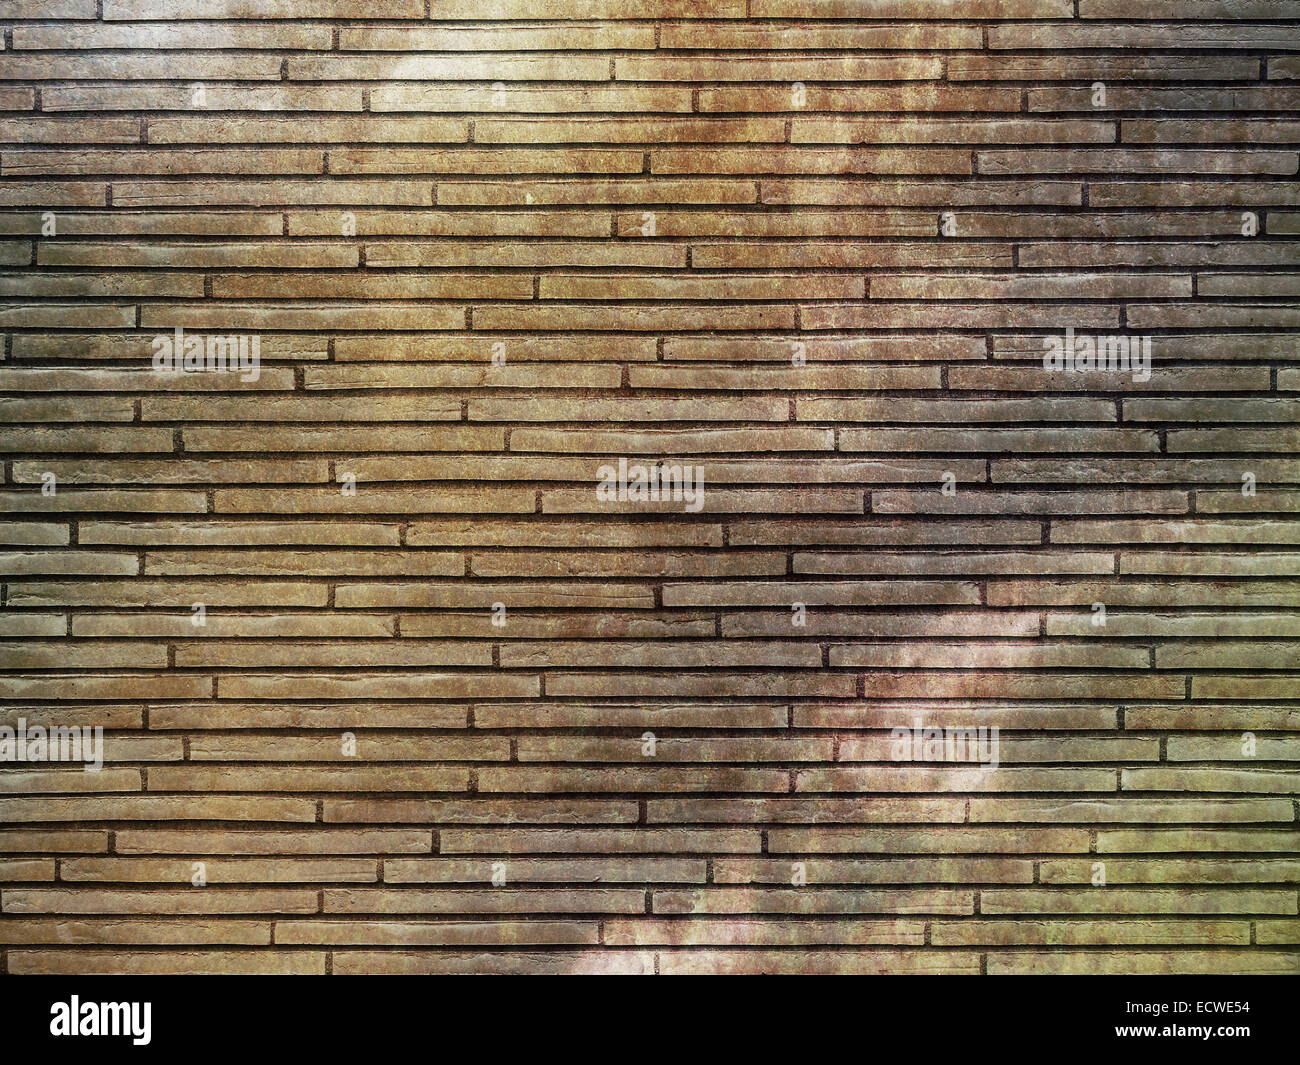 Old grunge bricks wall backround. Natural material for the design. Stock Photo